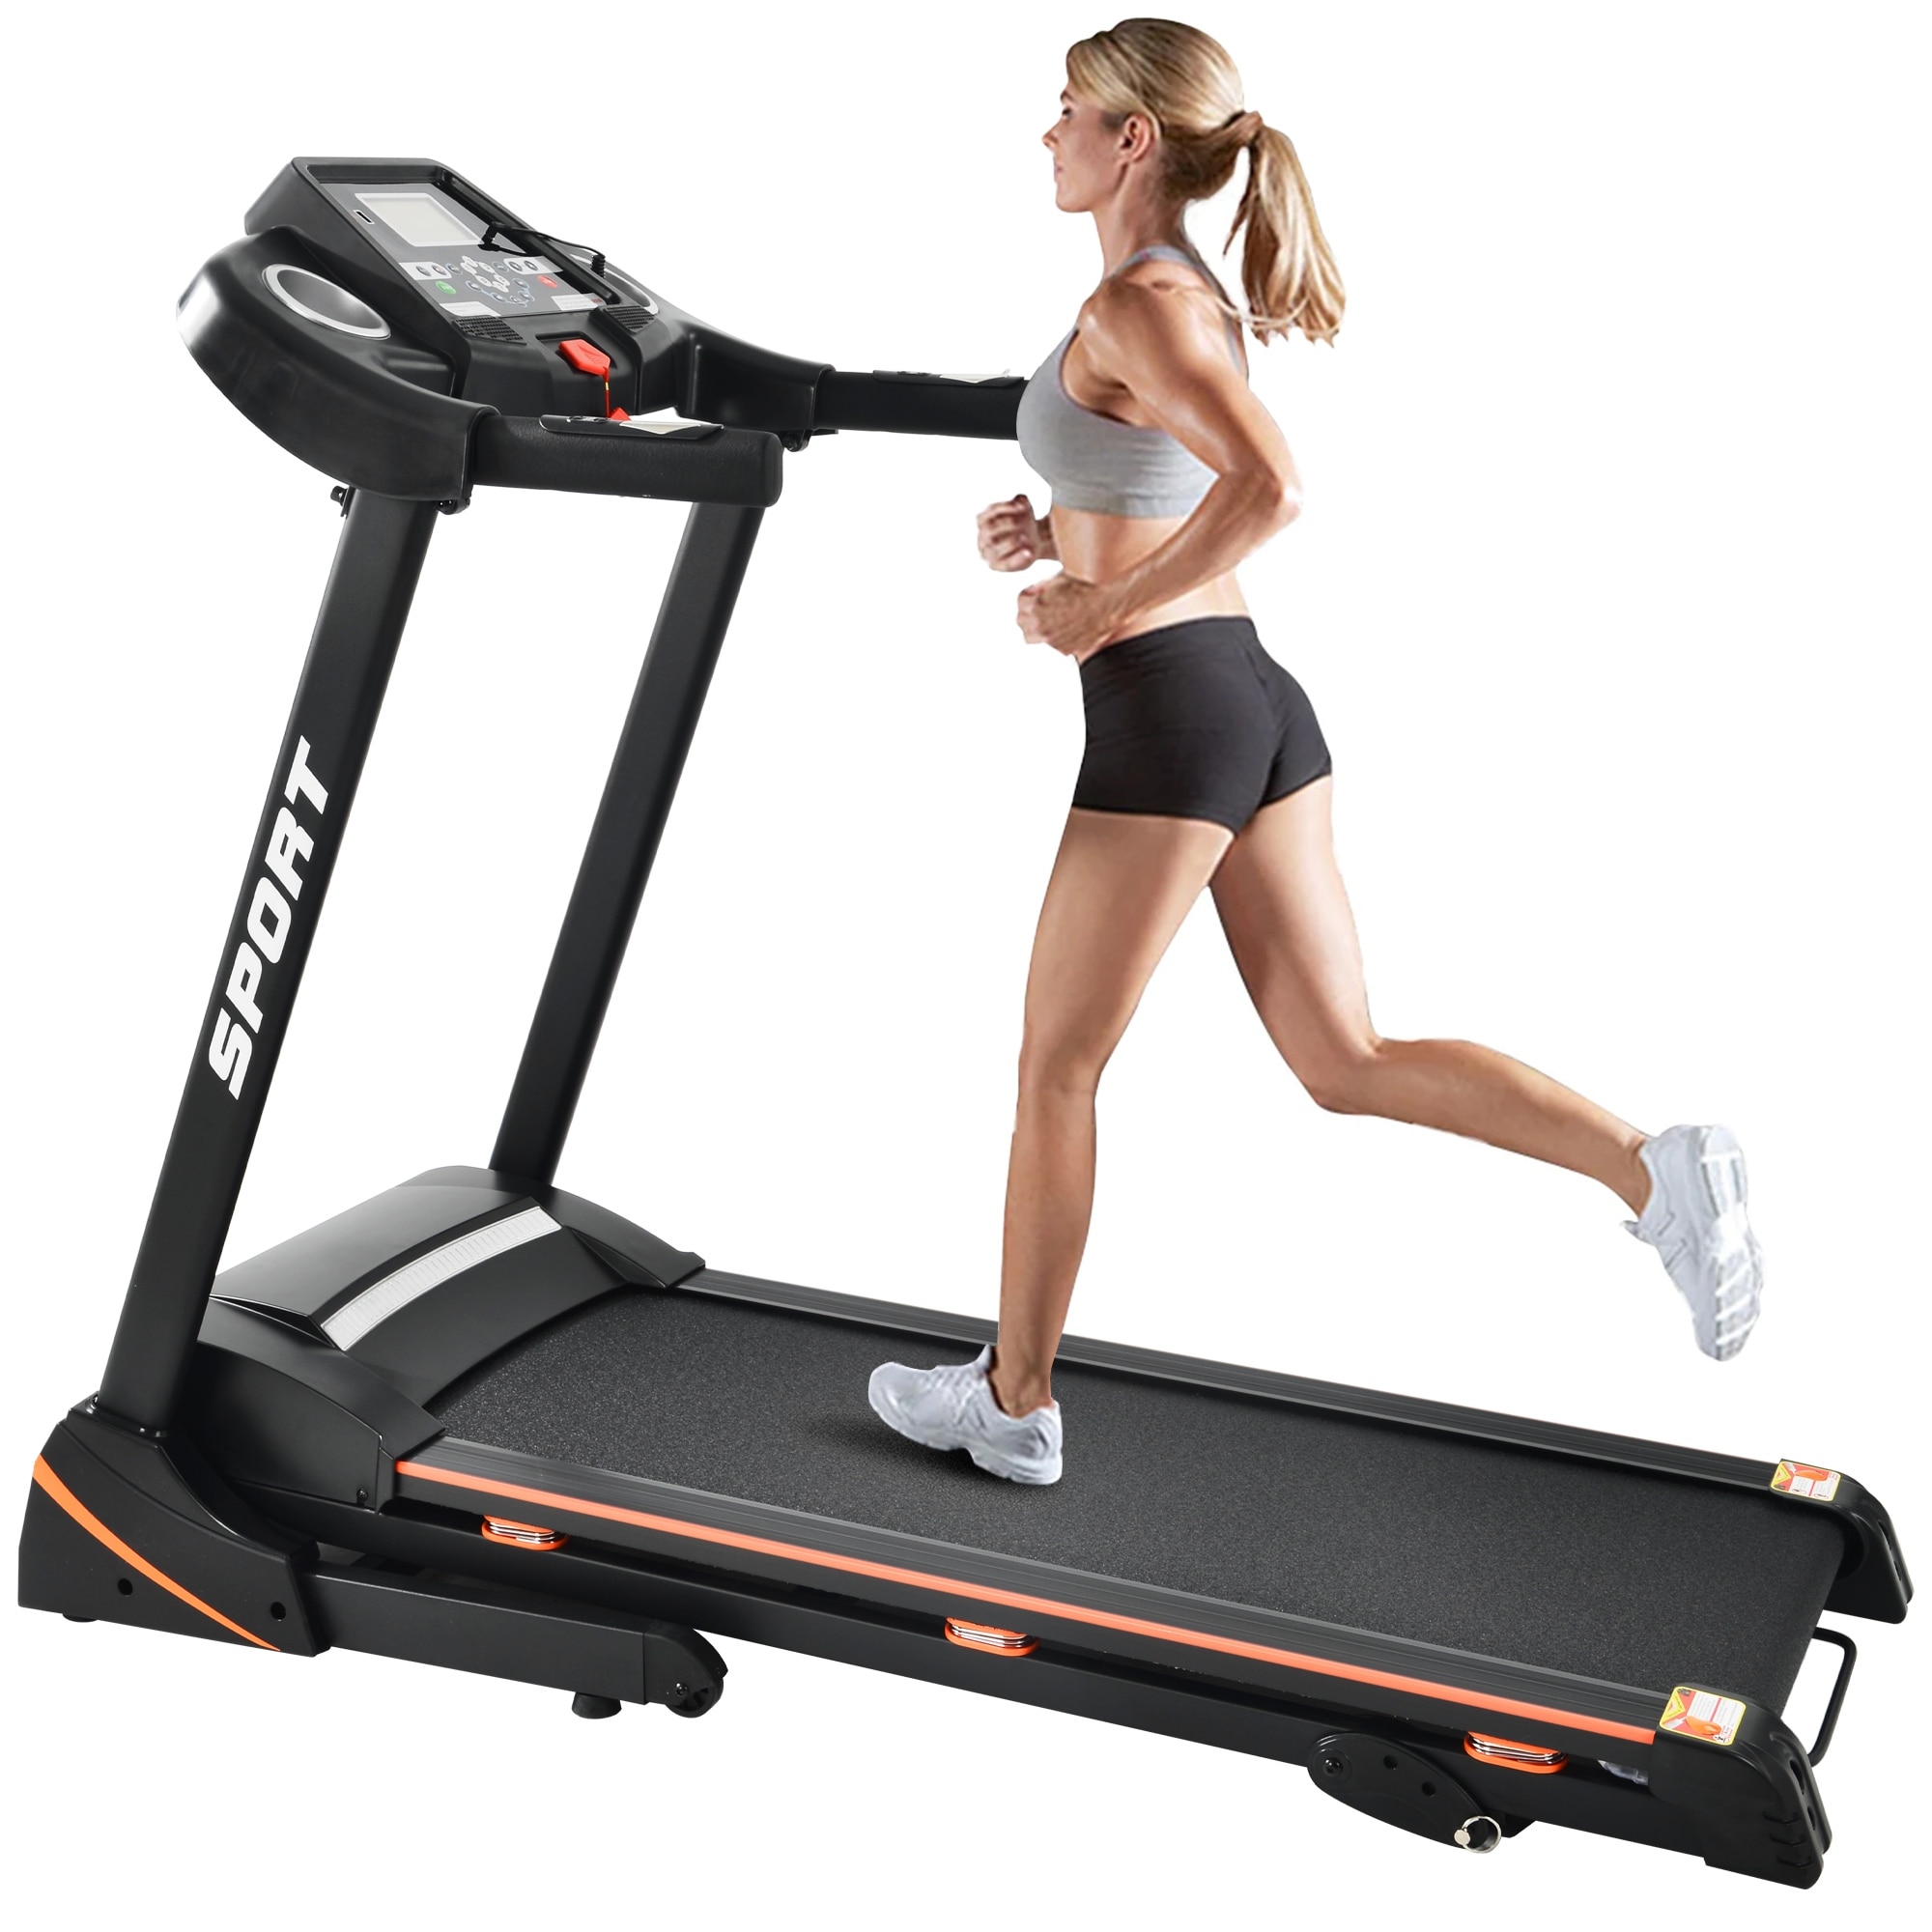 Folding Treadmill with Incline Functionality and LCD Display Screen